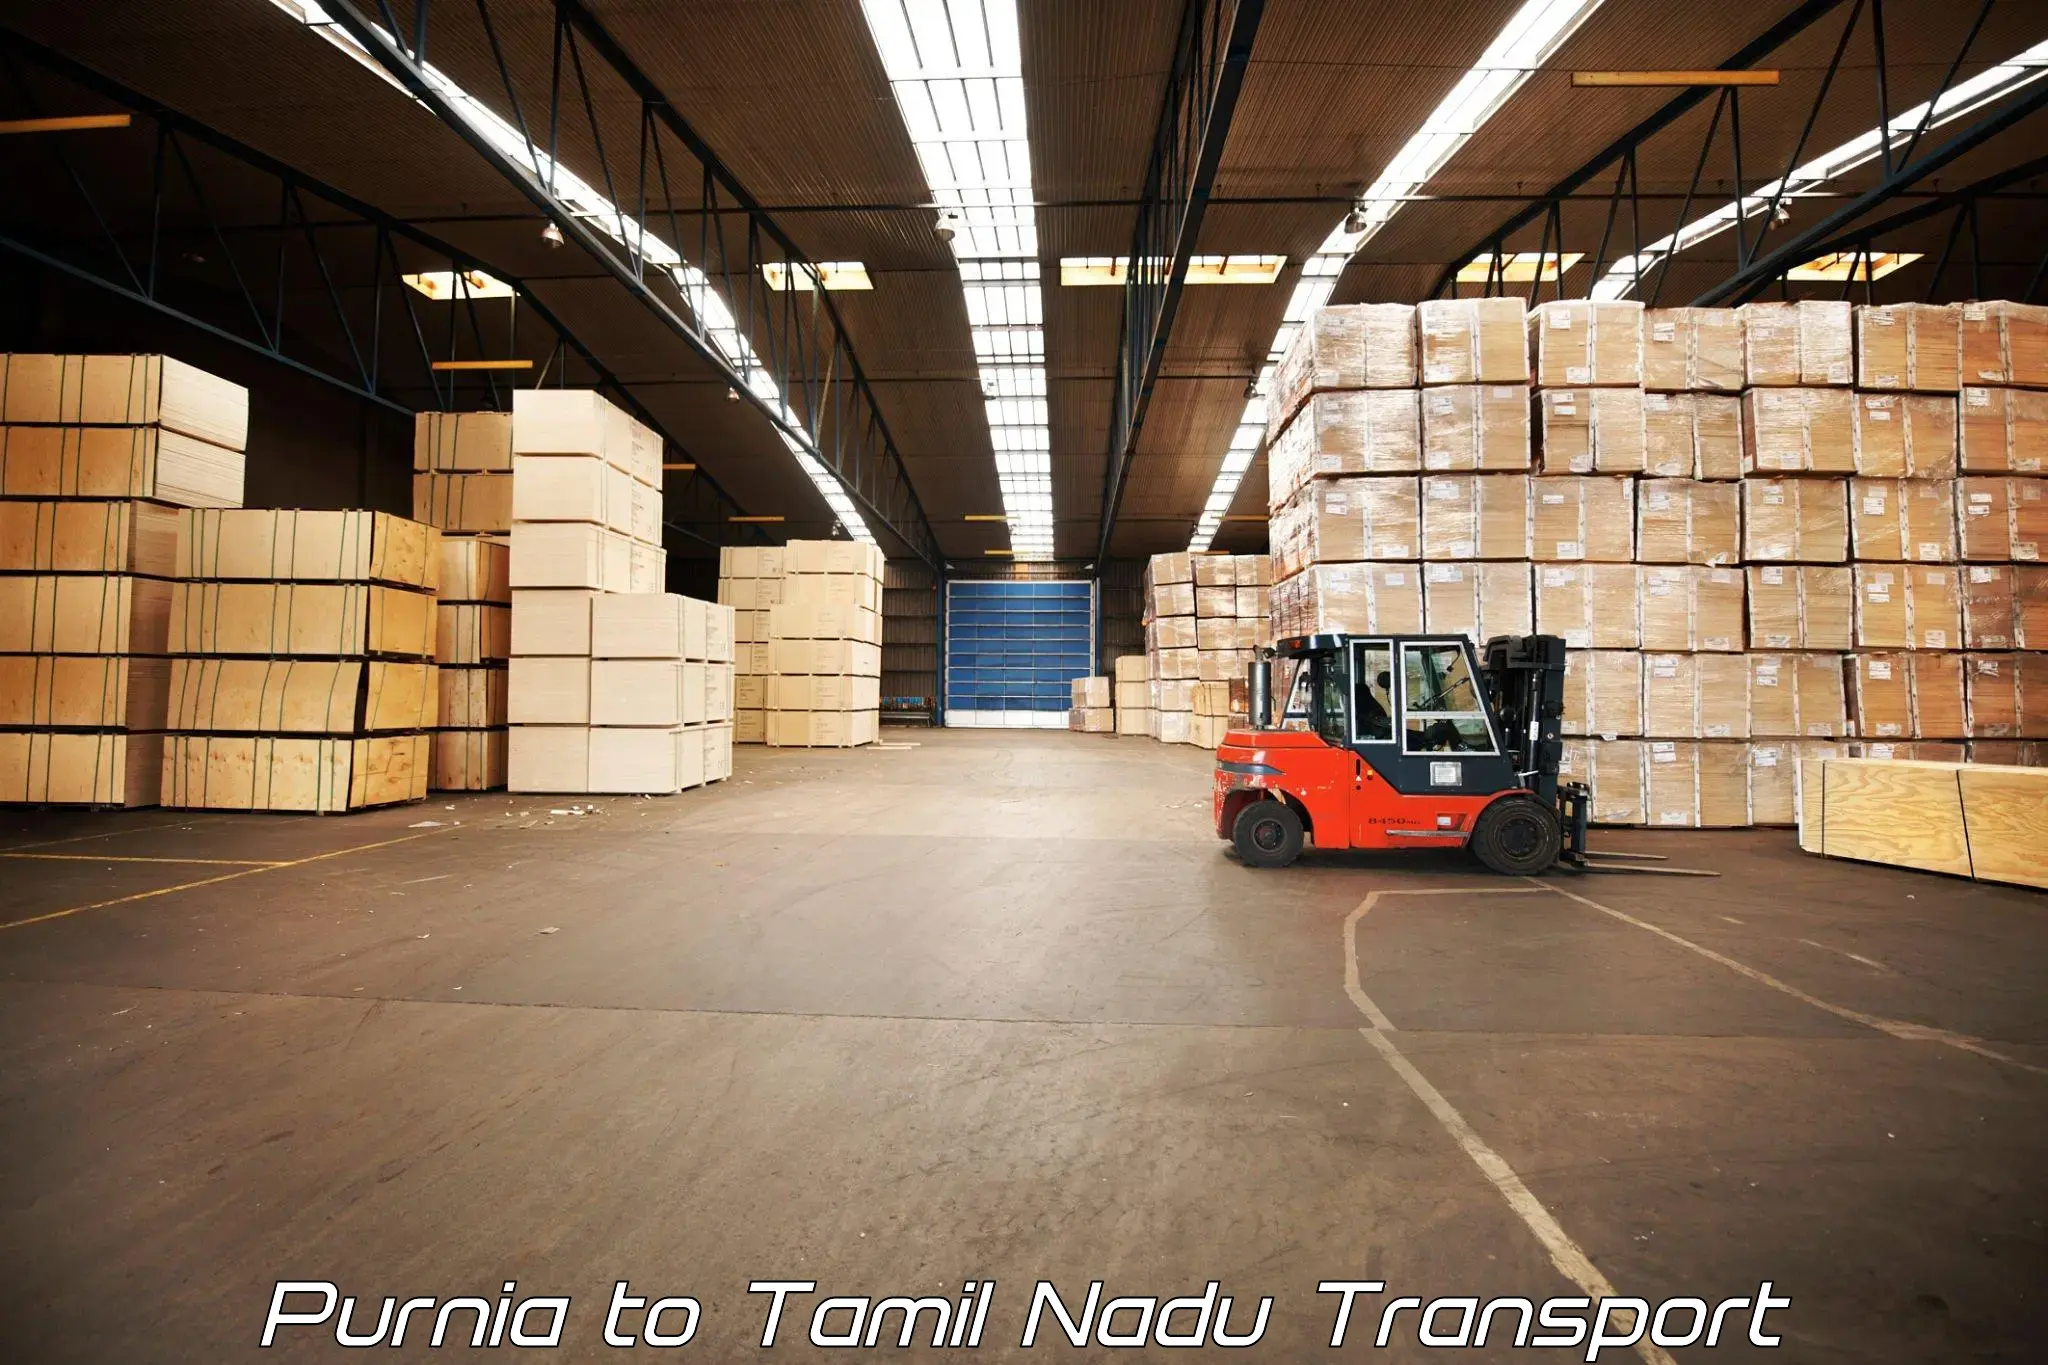 Daily parcel service transport Purnia to Marthandam